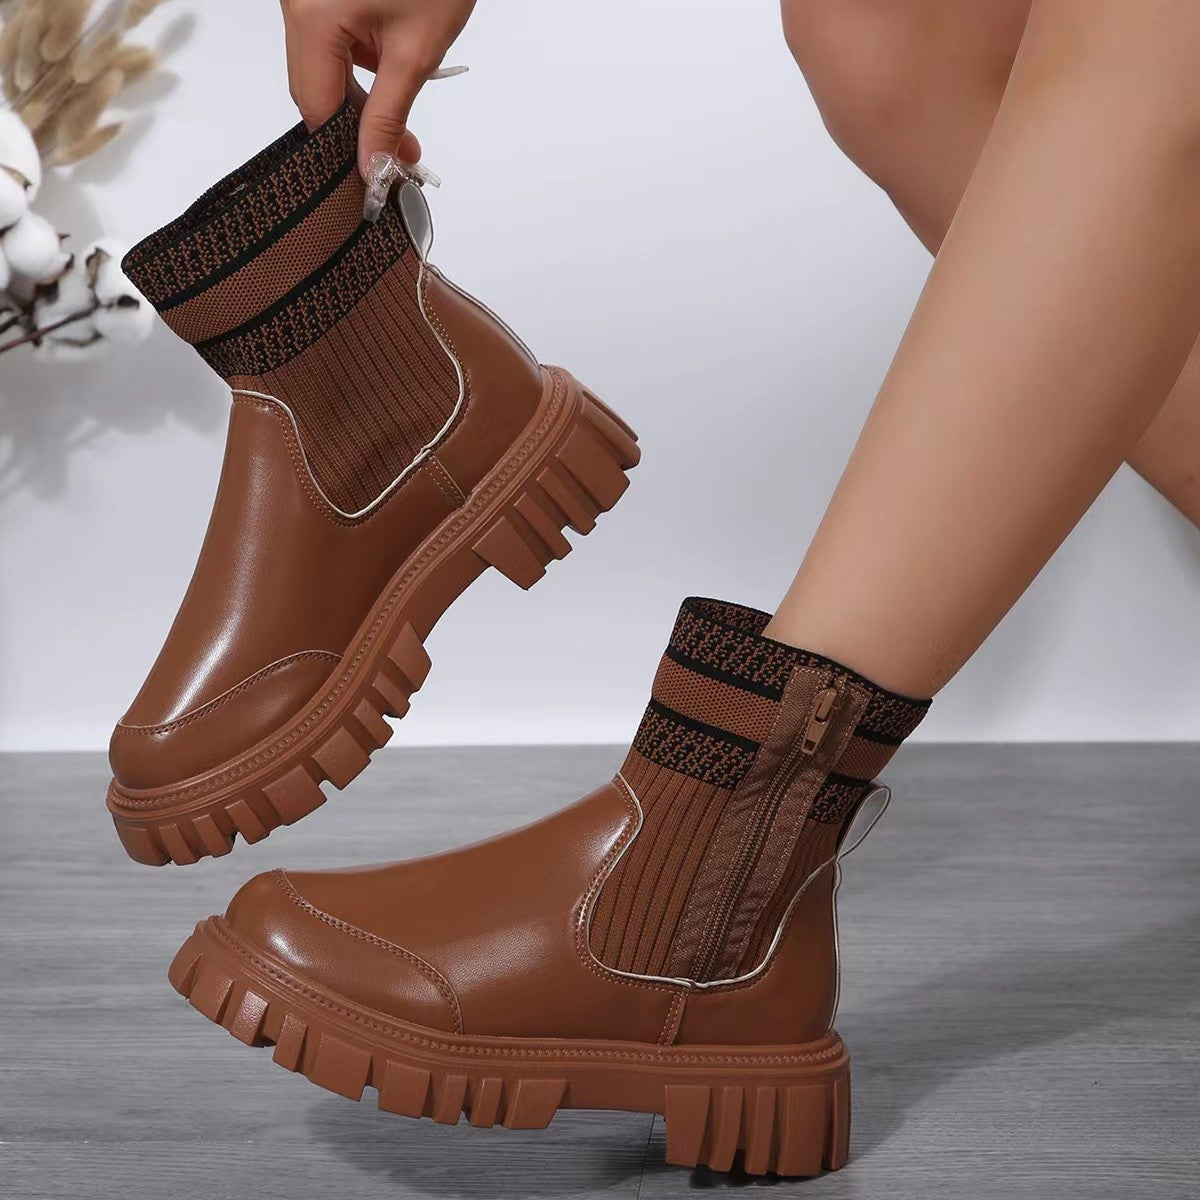 Boots  | Women's Fashionable Women's Middle Boots | Dark Brown |  36| thecurvestory.myshopify.com